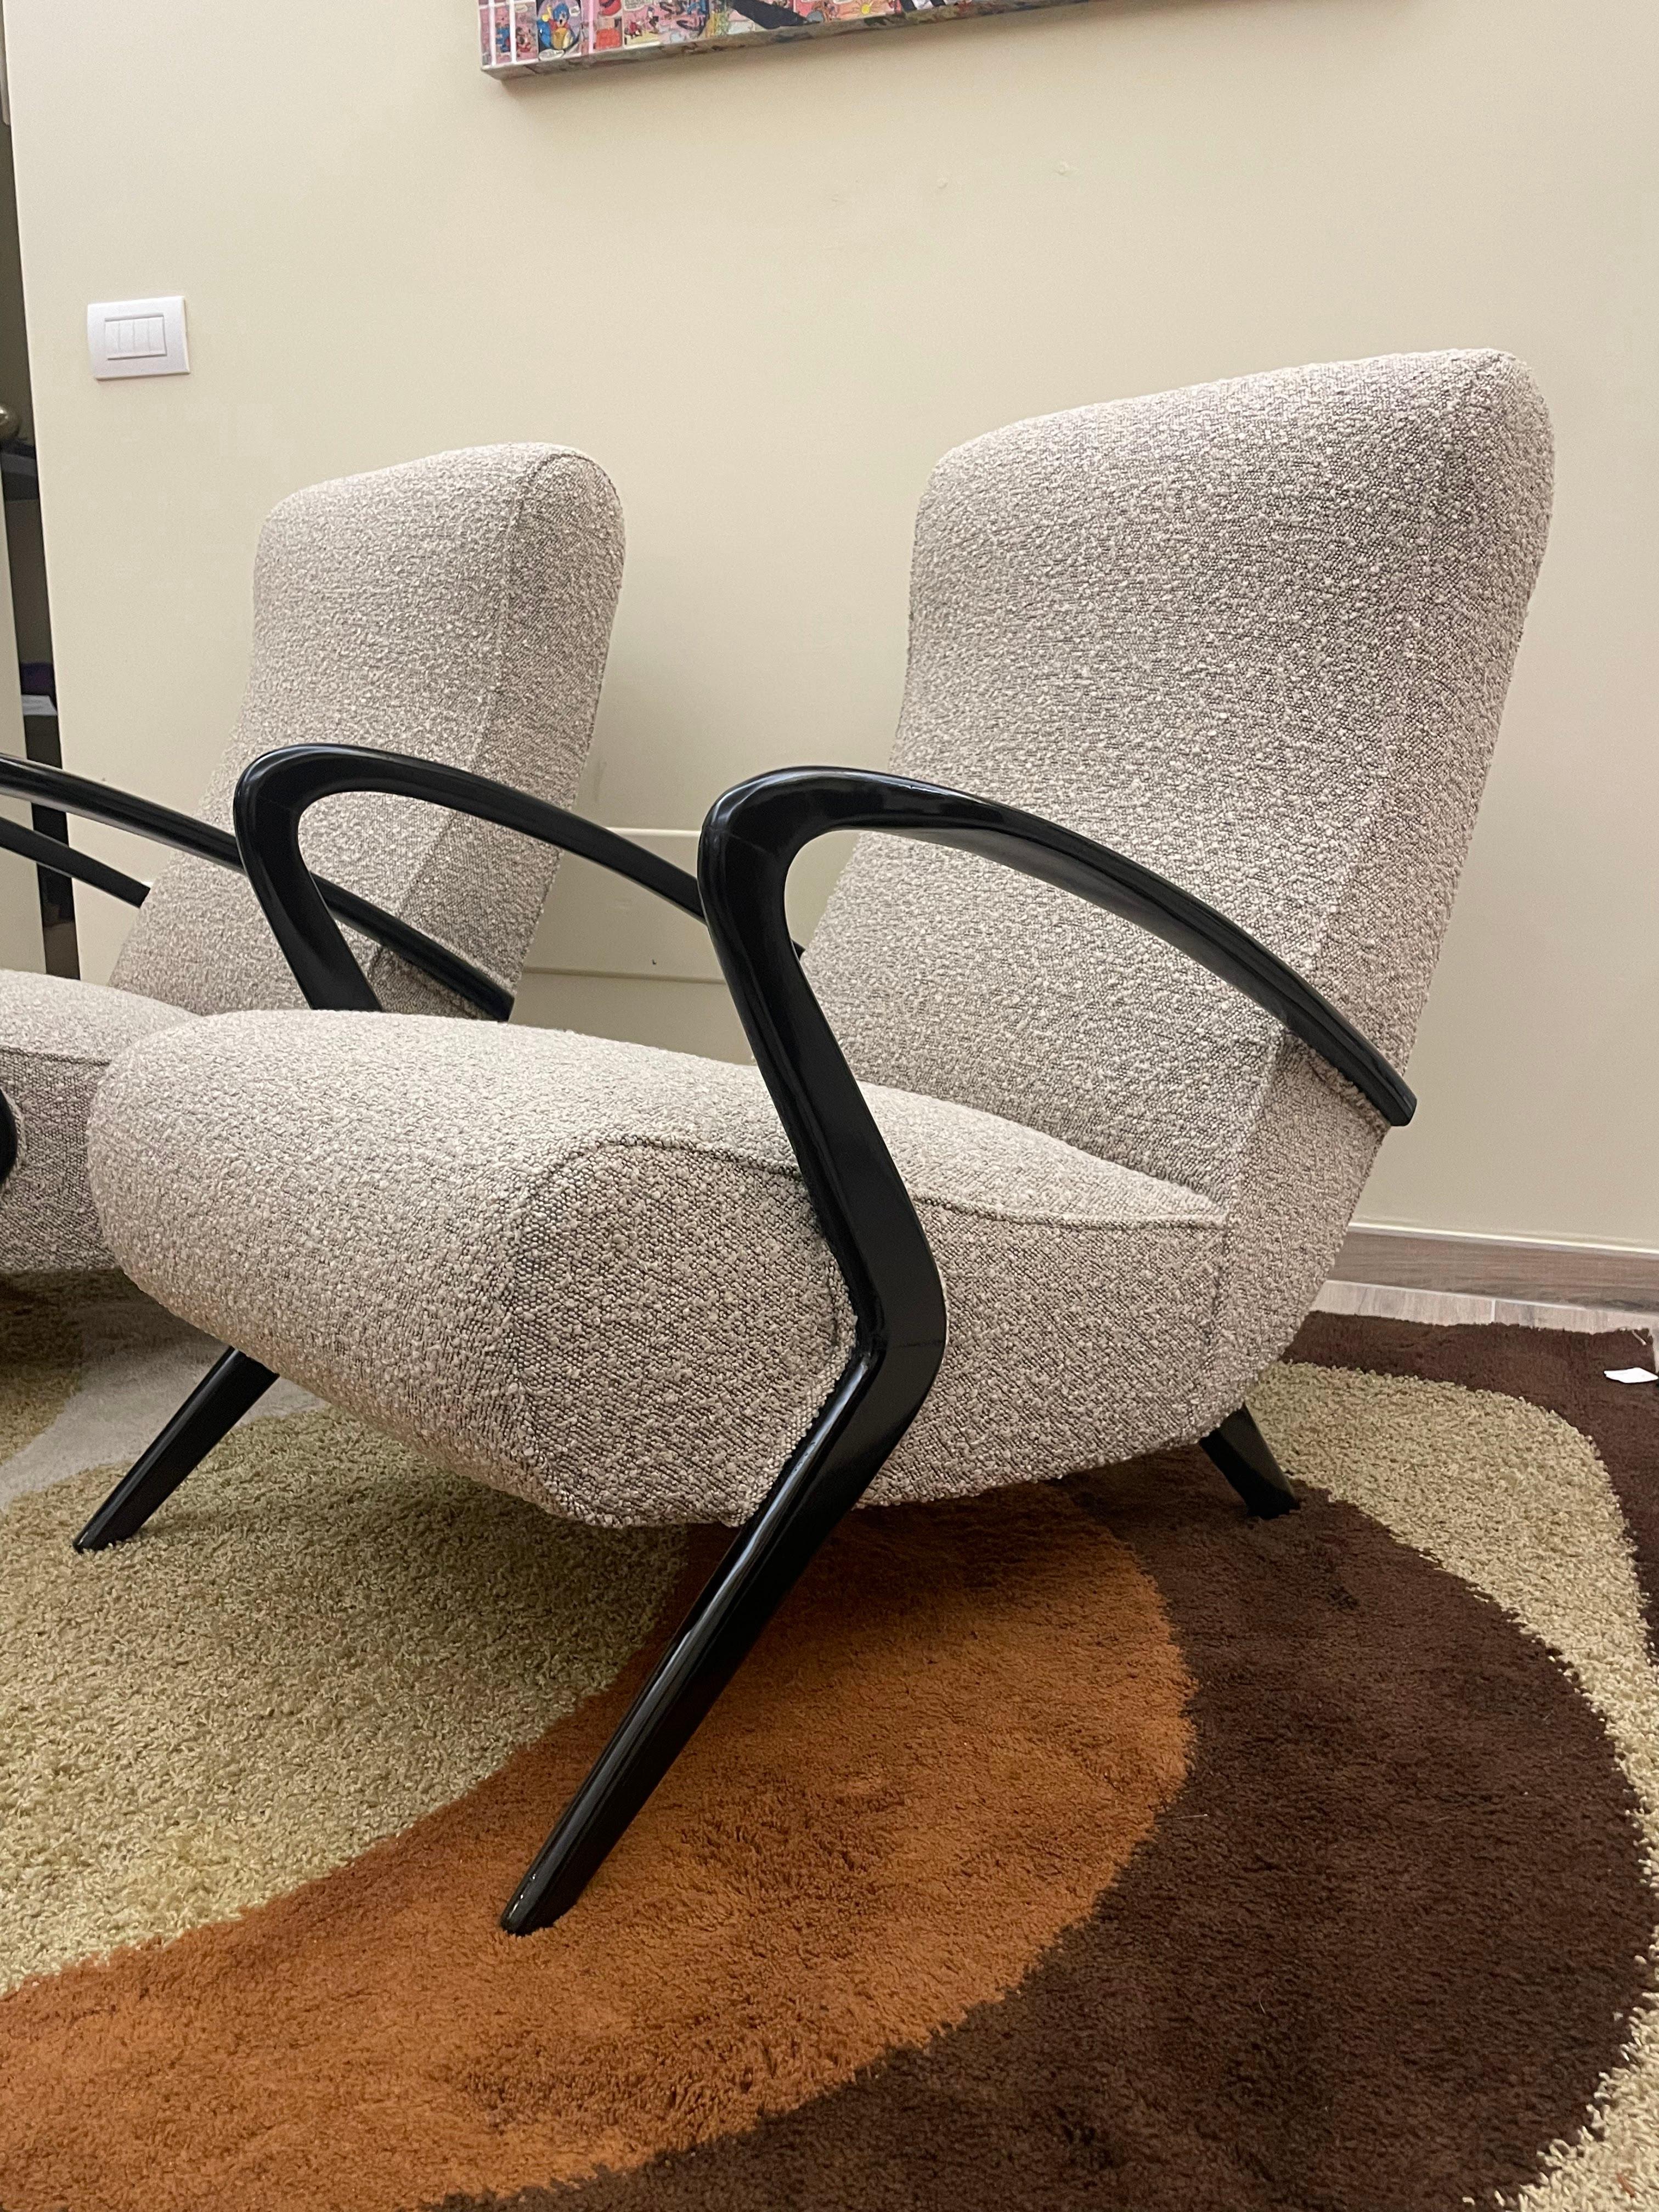 Pair of 1950s armchairs of Italian manufacture.
Armrest frame in stained wood and upholstery in bouclé fabric.
The set has been completely restored for both the wooden parts and the upholstery and covering.
Besides being very comfortable, they lend